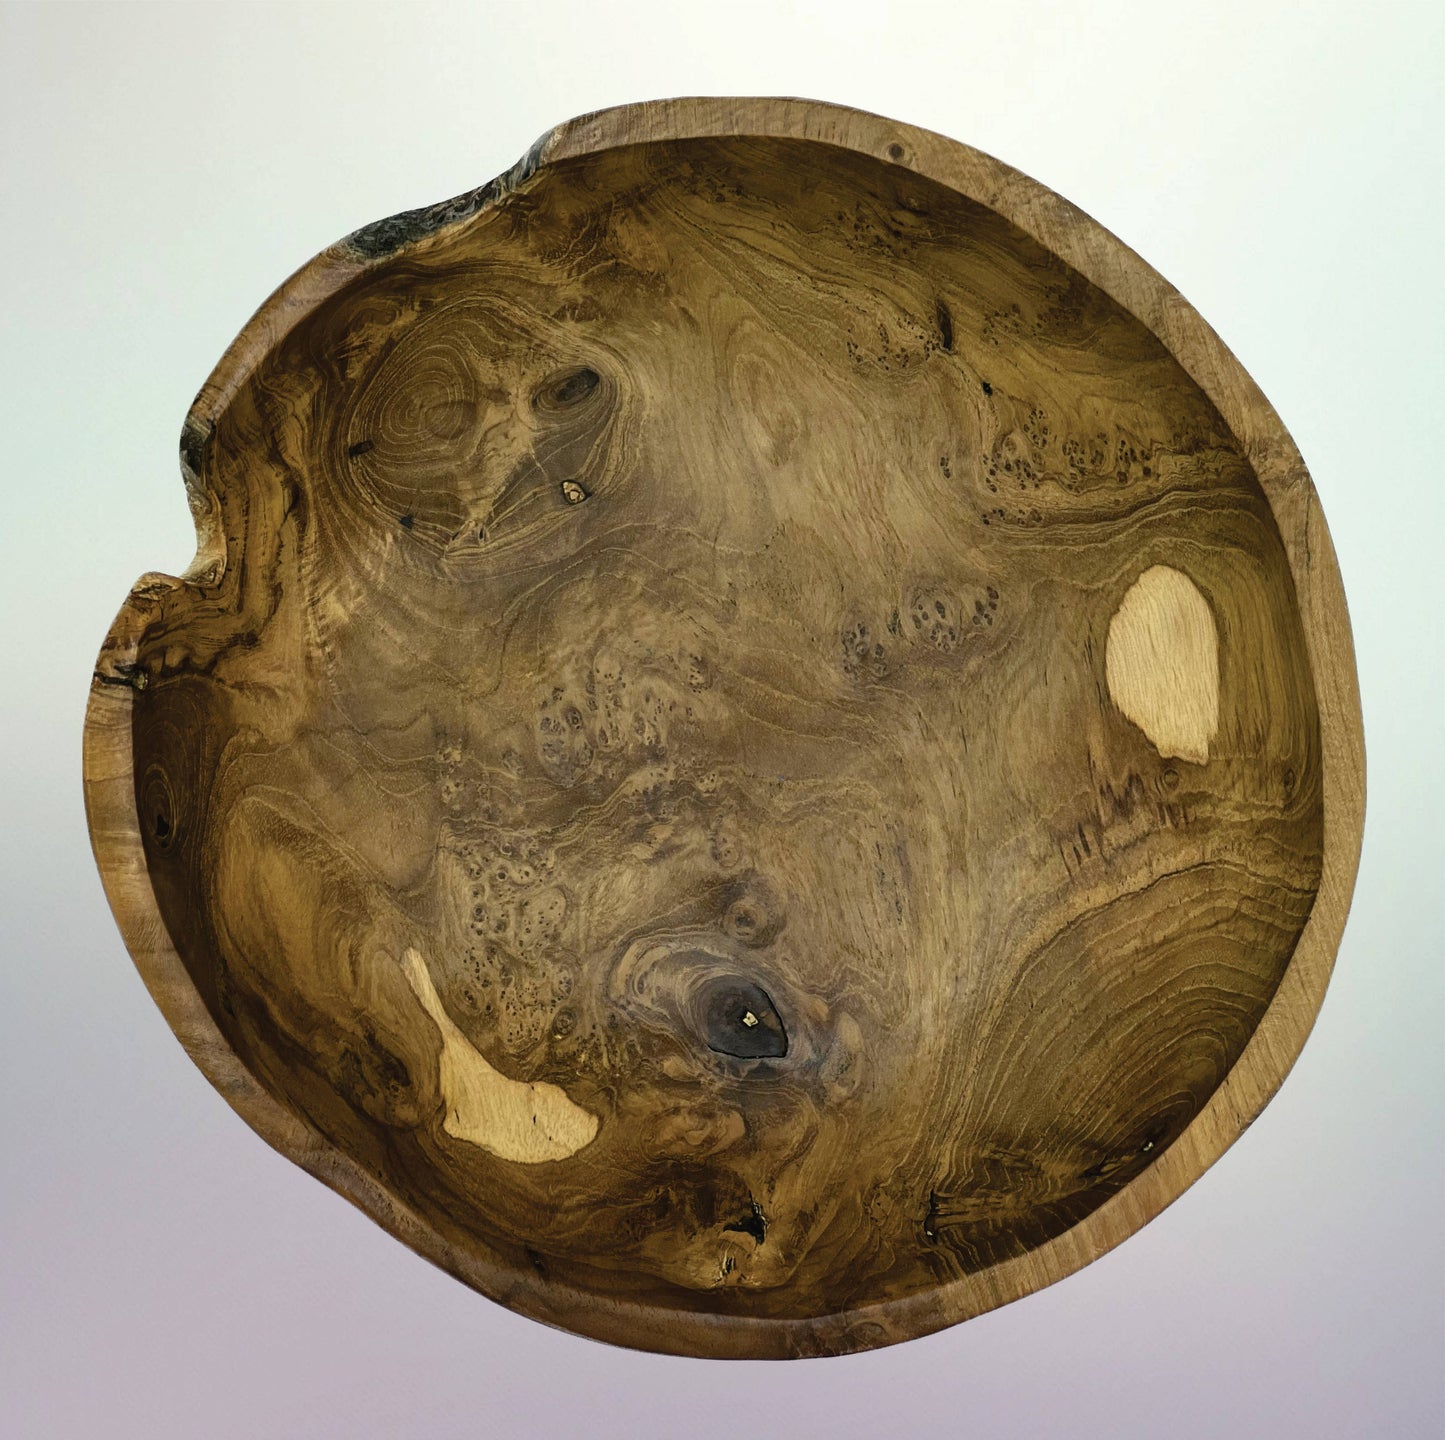 Load image into Gallery viewer, Medium Live Edge Salvaged Teak Bowl - Hand Carved Wood Bowl
